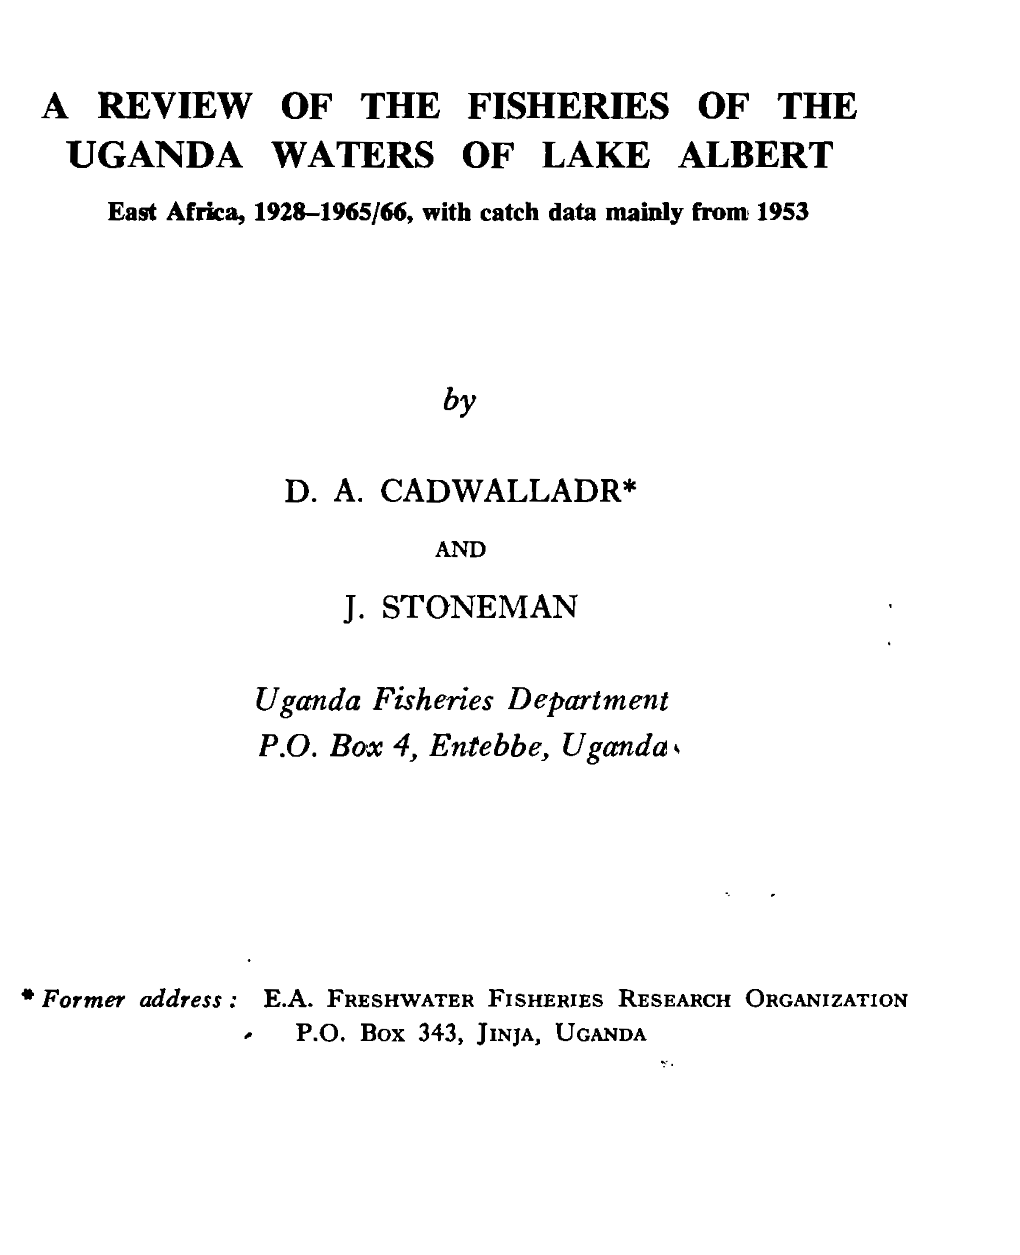 A REVIEW of the FISHERIES of the UGANDA WATERS of LAKE ALBERT East Africa, 1928-1965/66, Witb Catcb Data Mainly from 1953